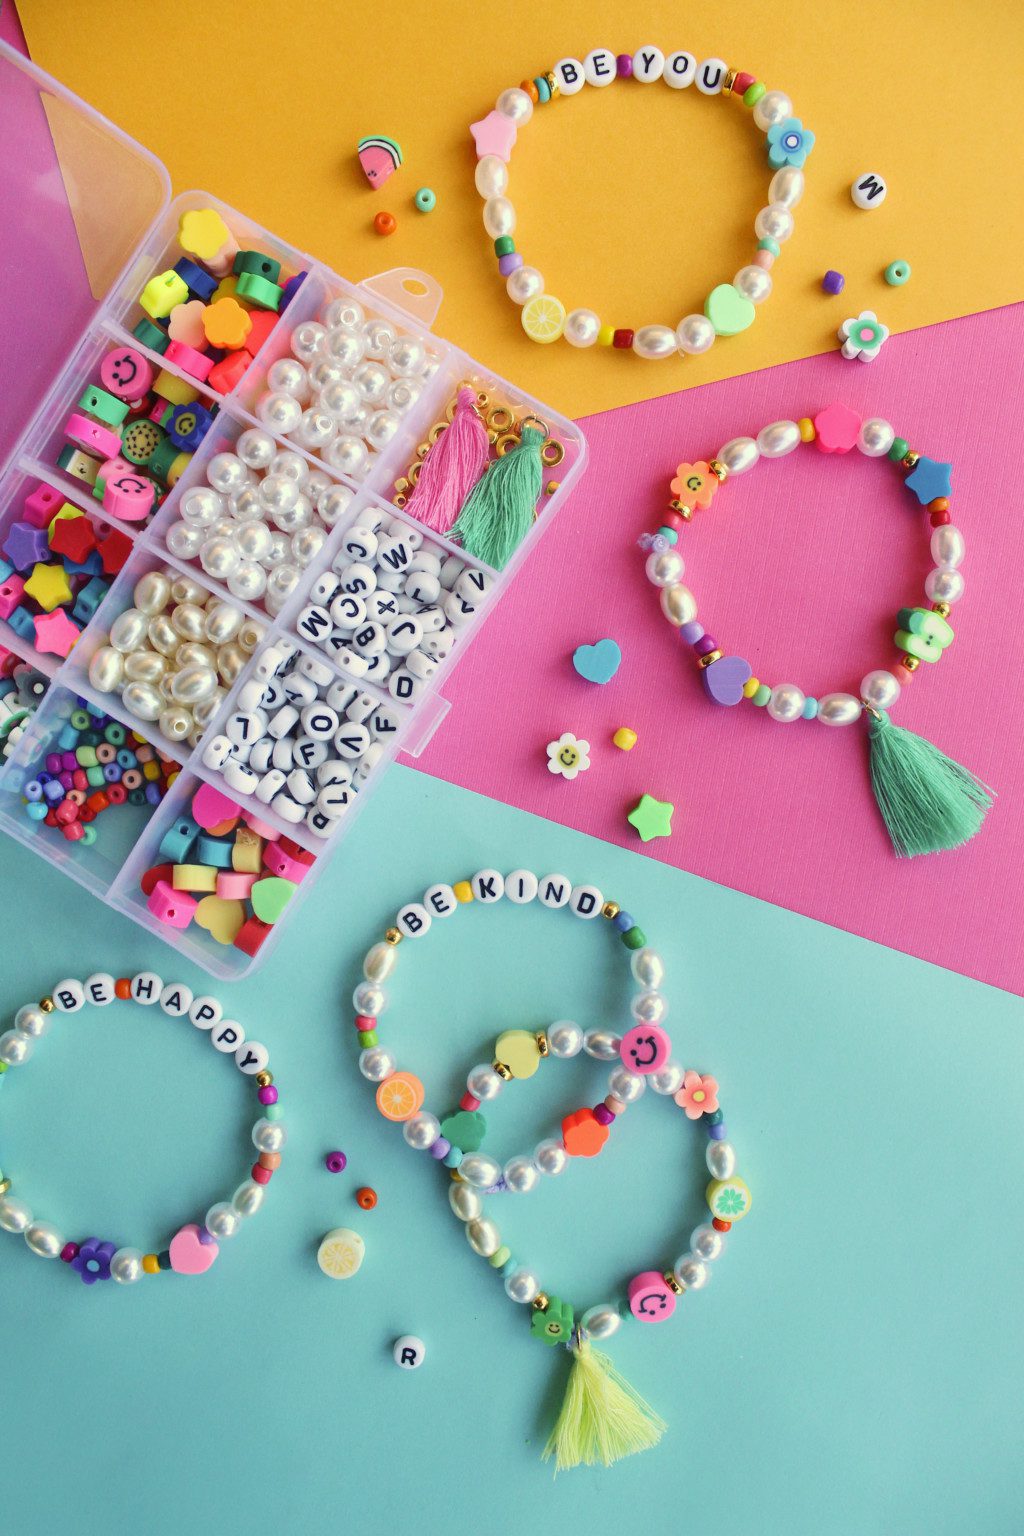 The Pretty Life Girls | Creating connection through crafting | The ...